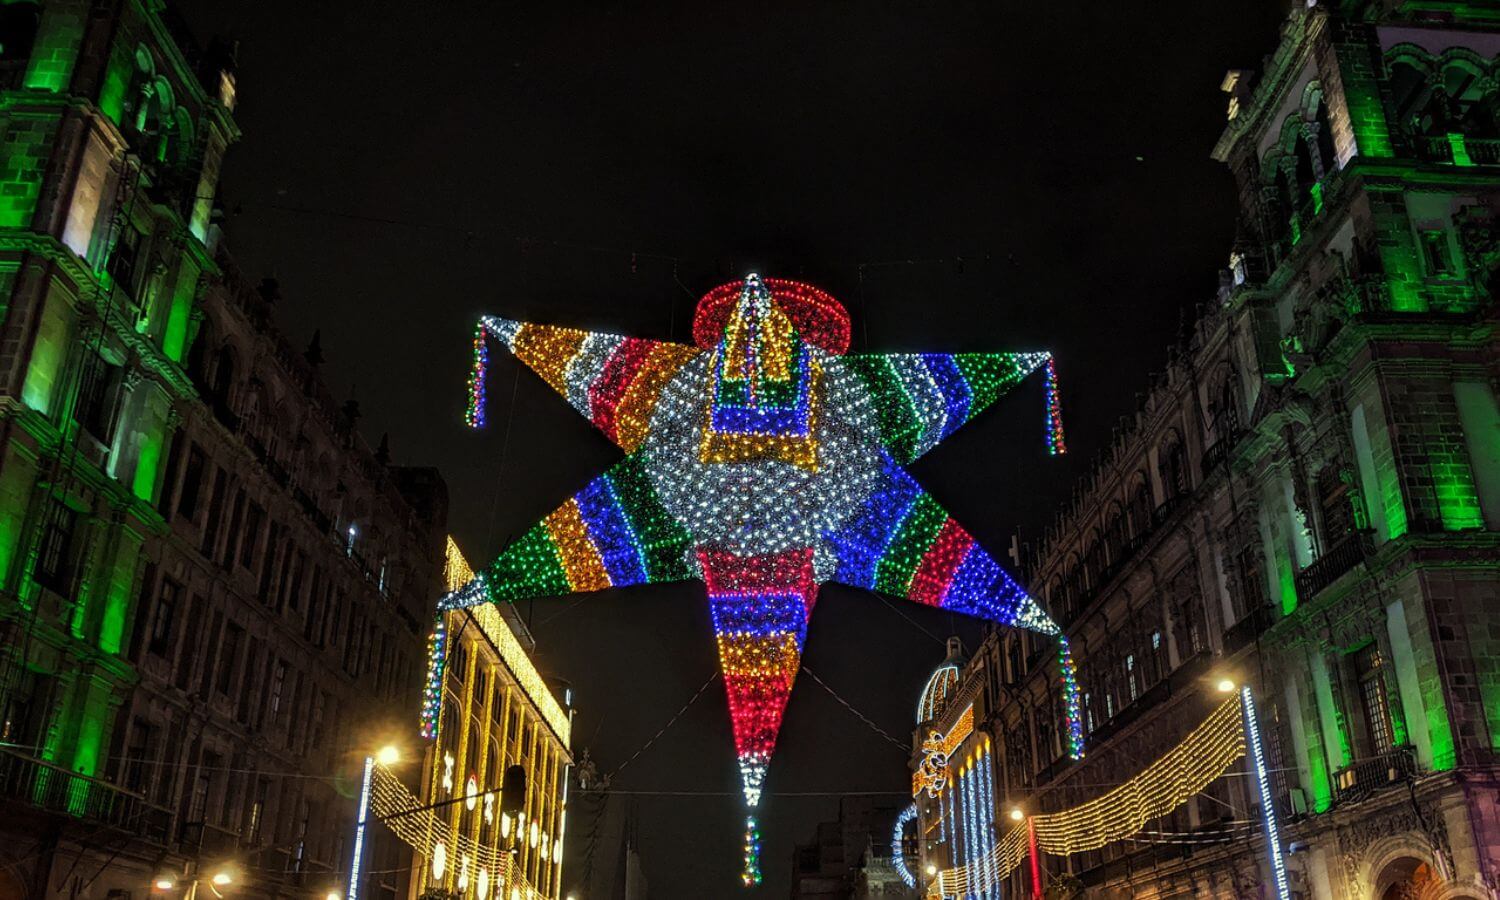 Street Christmas Lights in the shape of a pinata, in Mexico